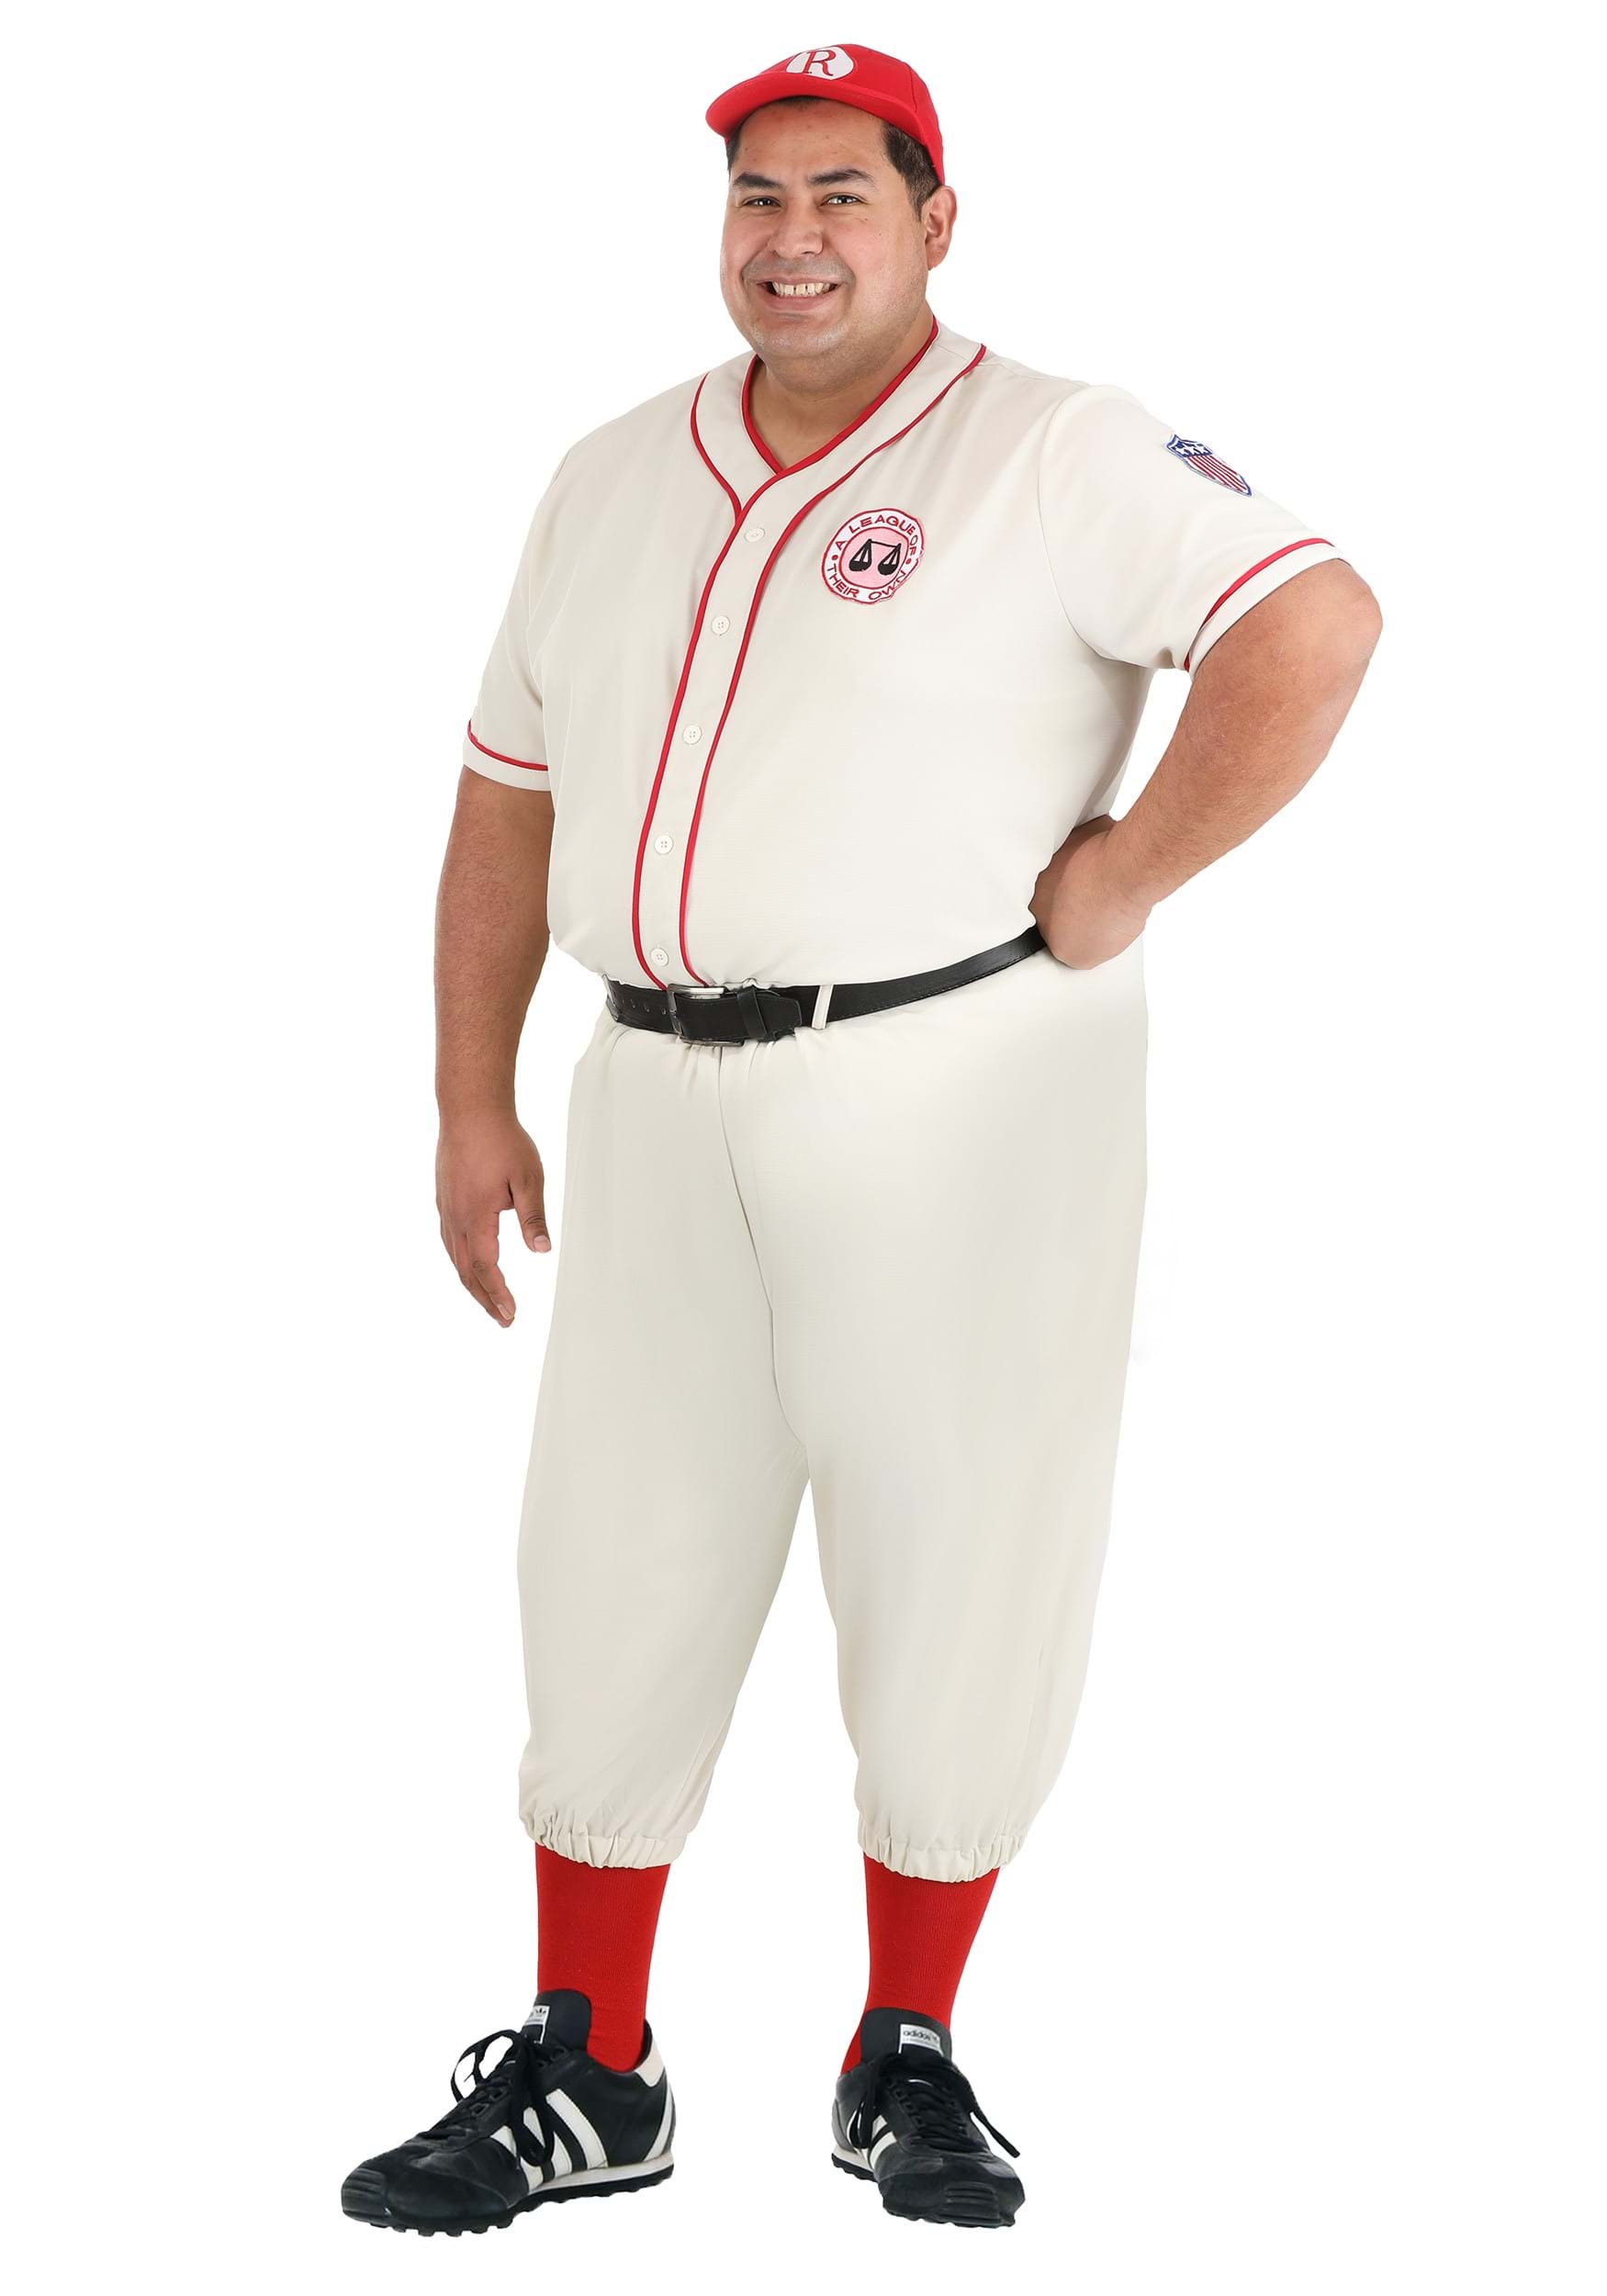 Plus Size Coach Jimmy Costume from A League of Their Own | Exclusive